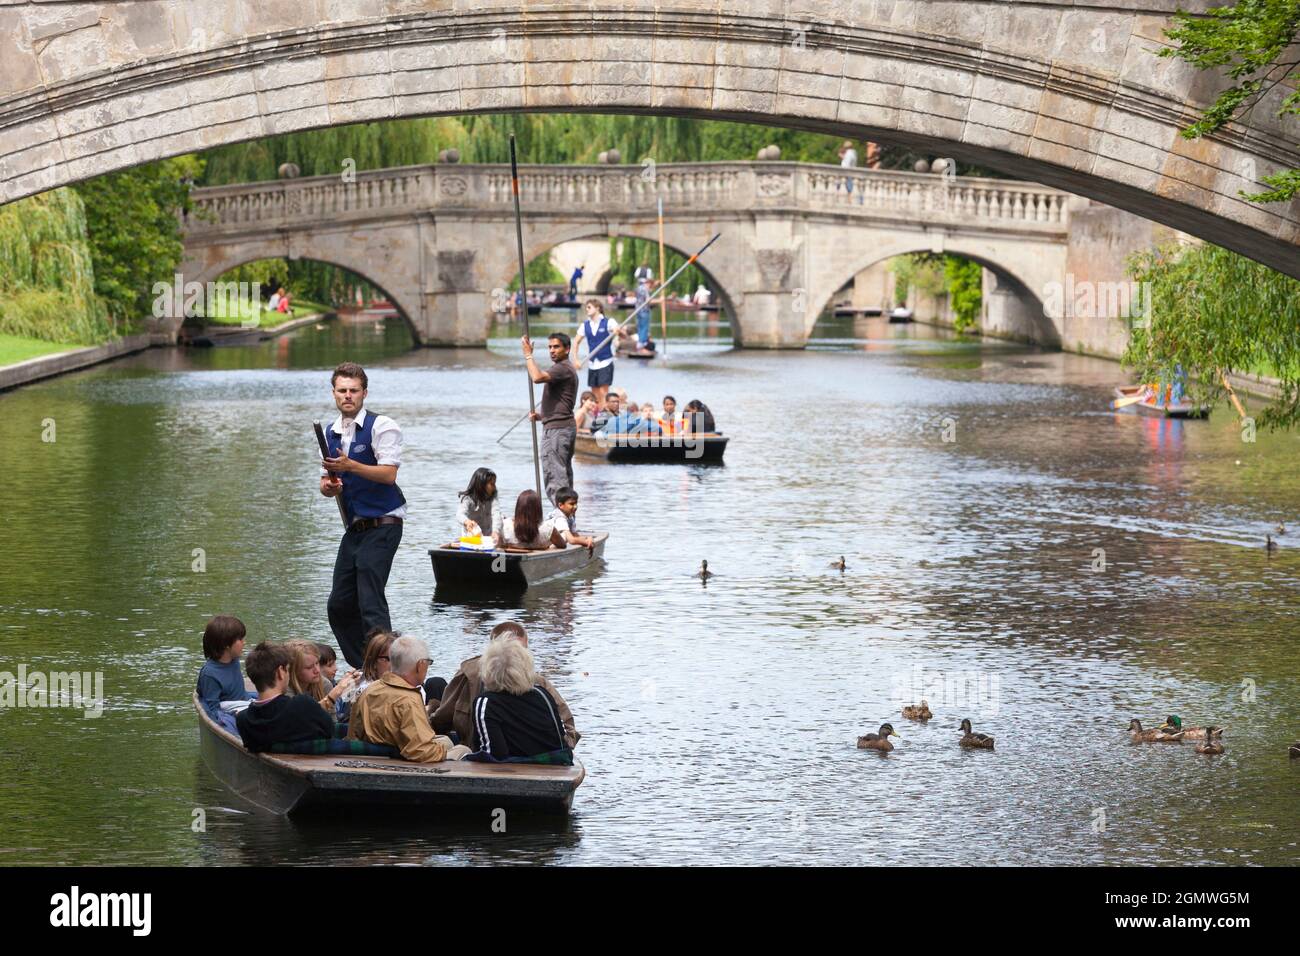 Cambridge, England - 20 July 2009; many people in view. A quintessentially English pursuit on a fine summer's day -  punting on the River Cam, which r Stock Photo